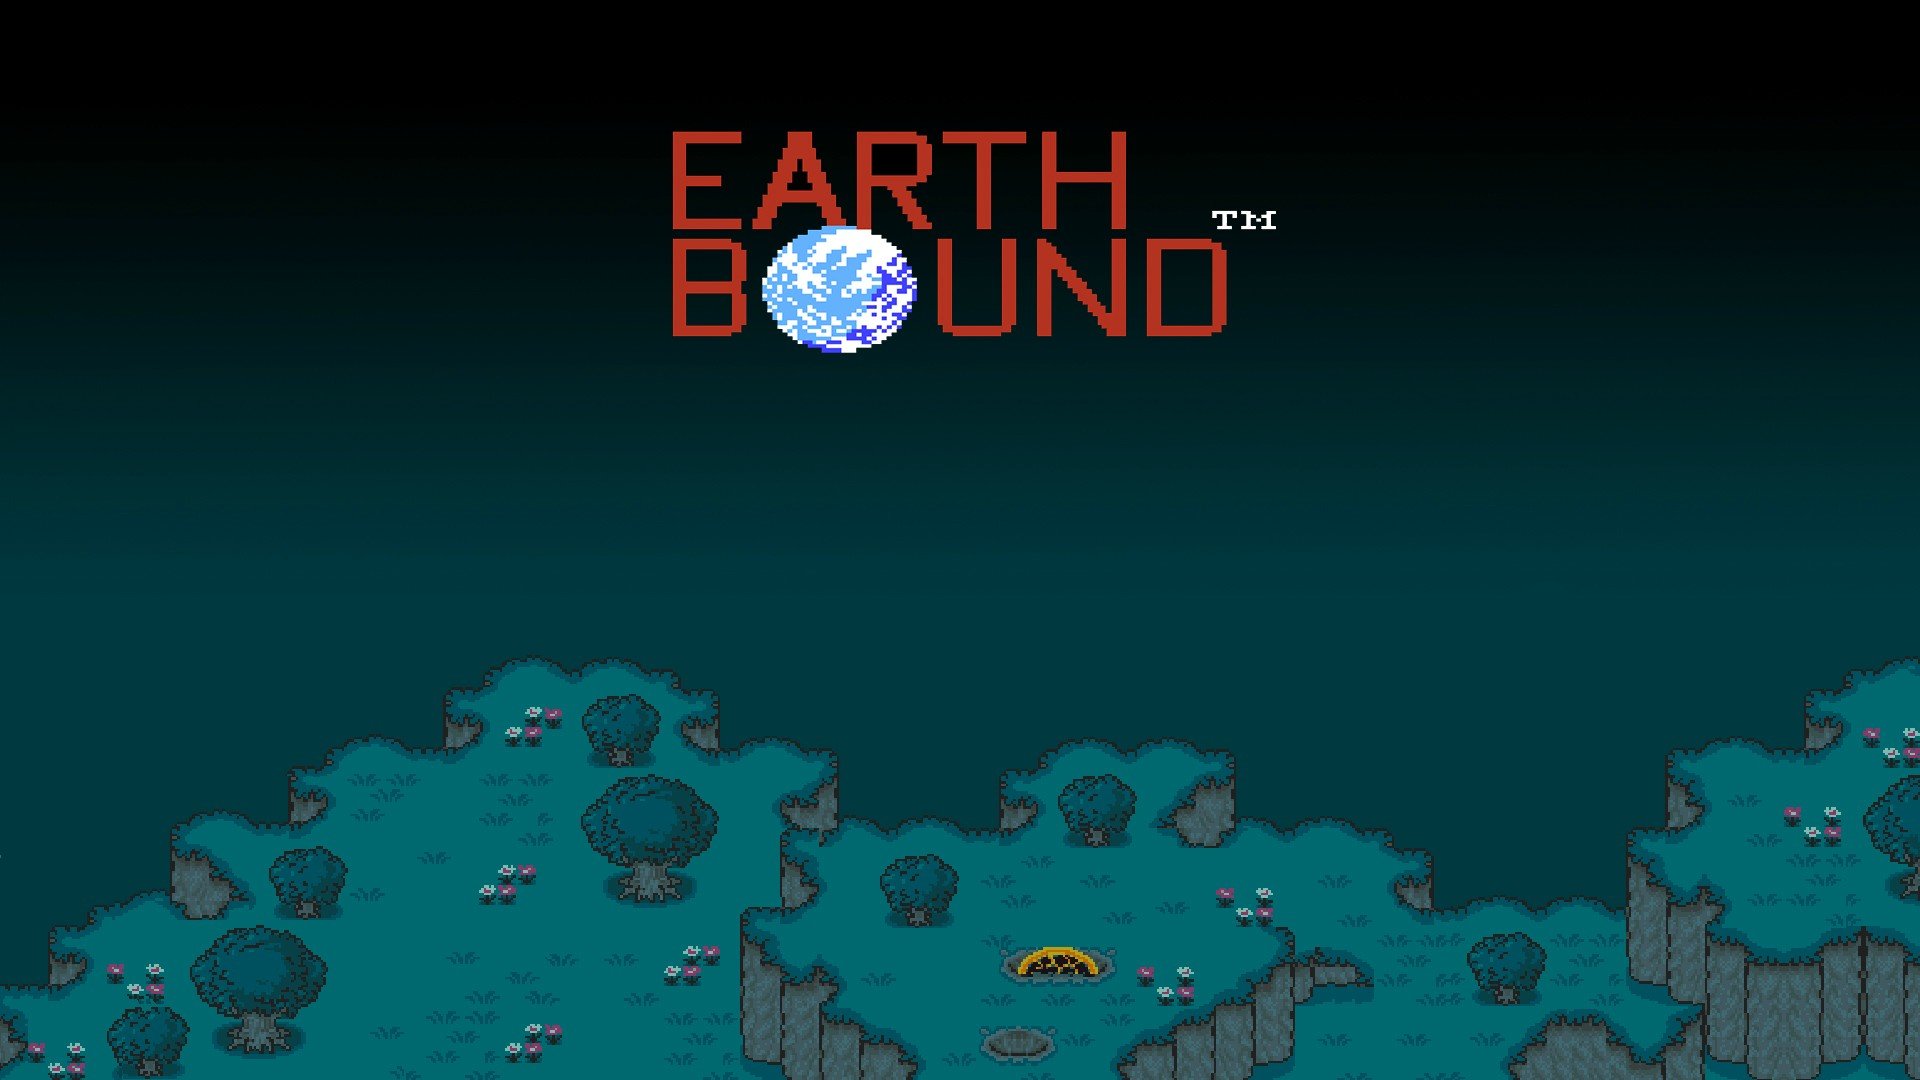 EarthBound HD Wallpapers